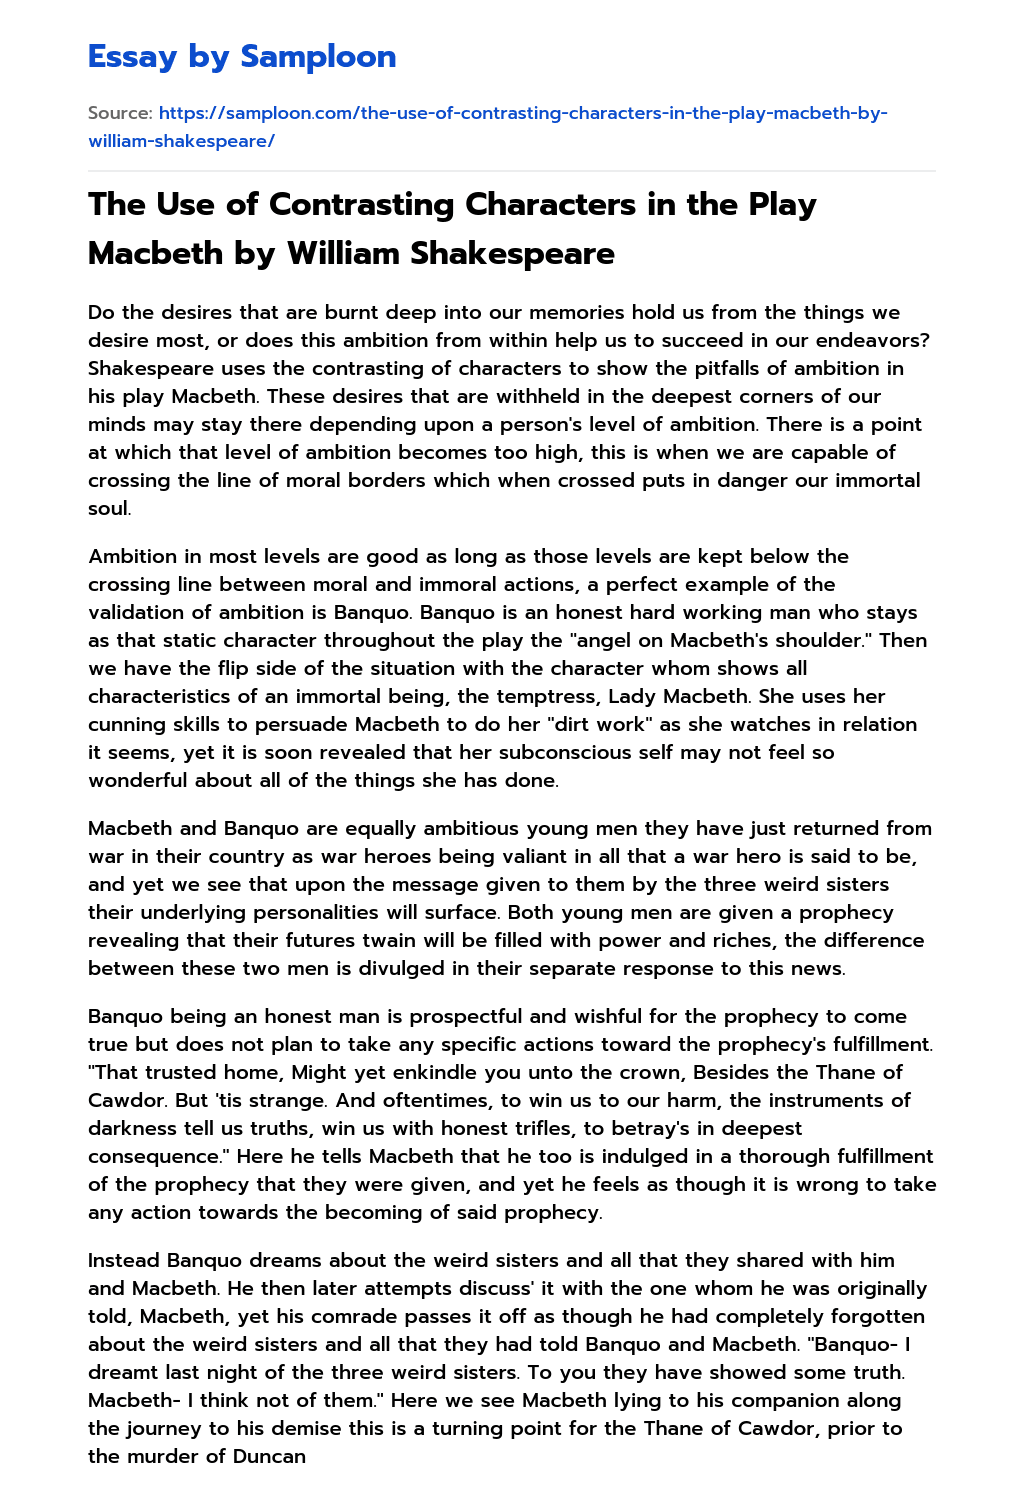 The Use of Contrasting Characters in the Play Macbeth by William Shakespeare essay